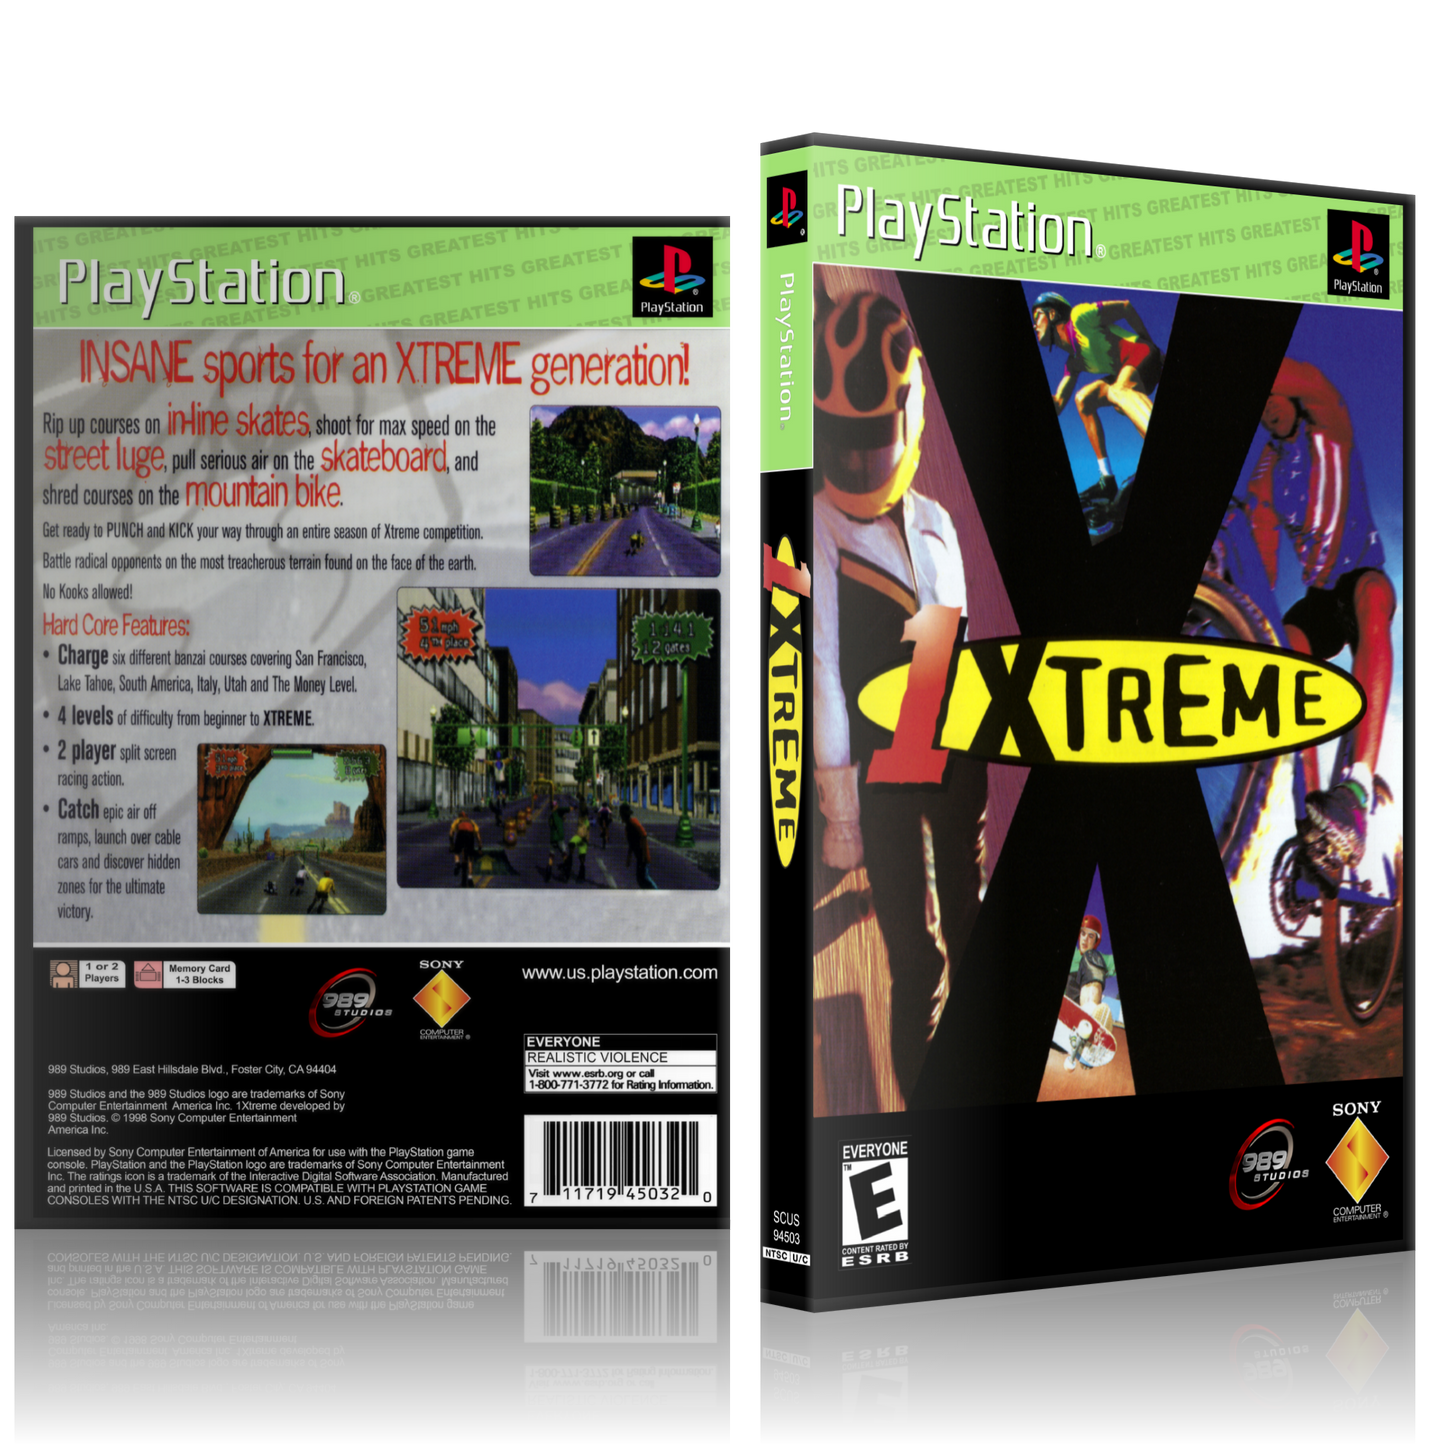 PS1 Case - NO GAME - 1Xtreme - Greatest Hits